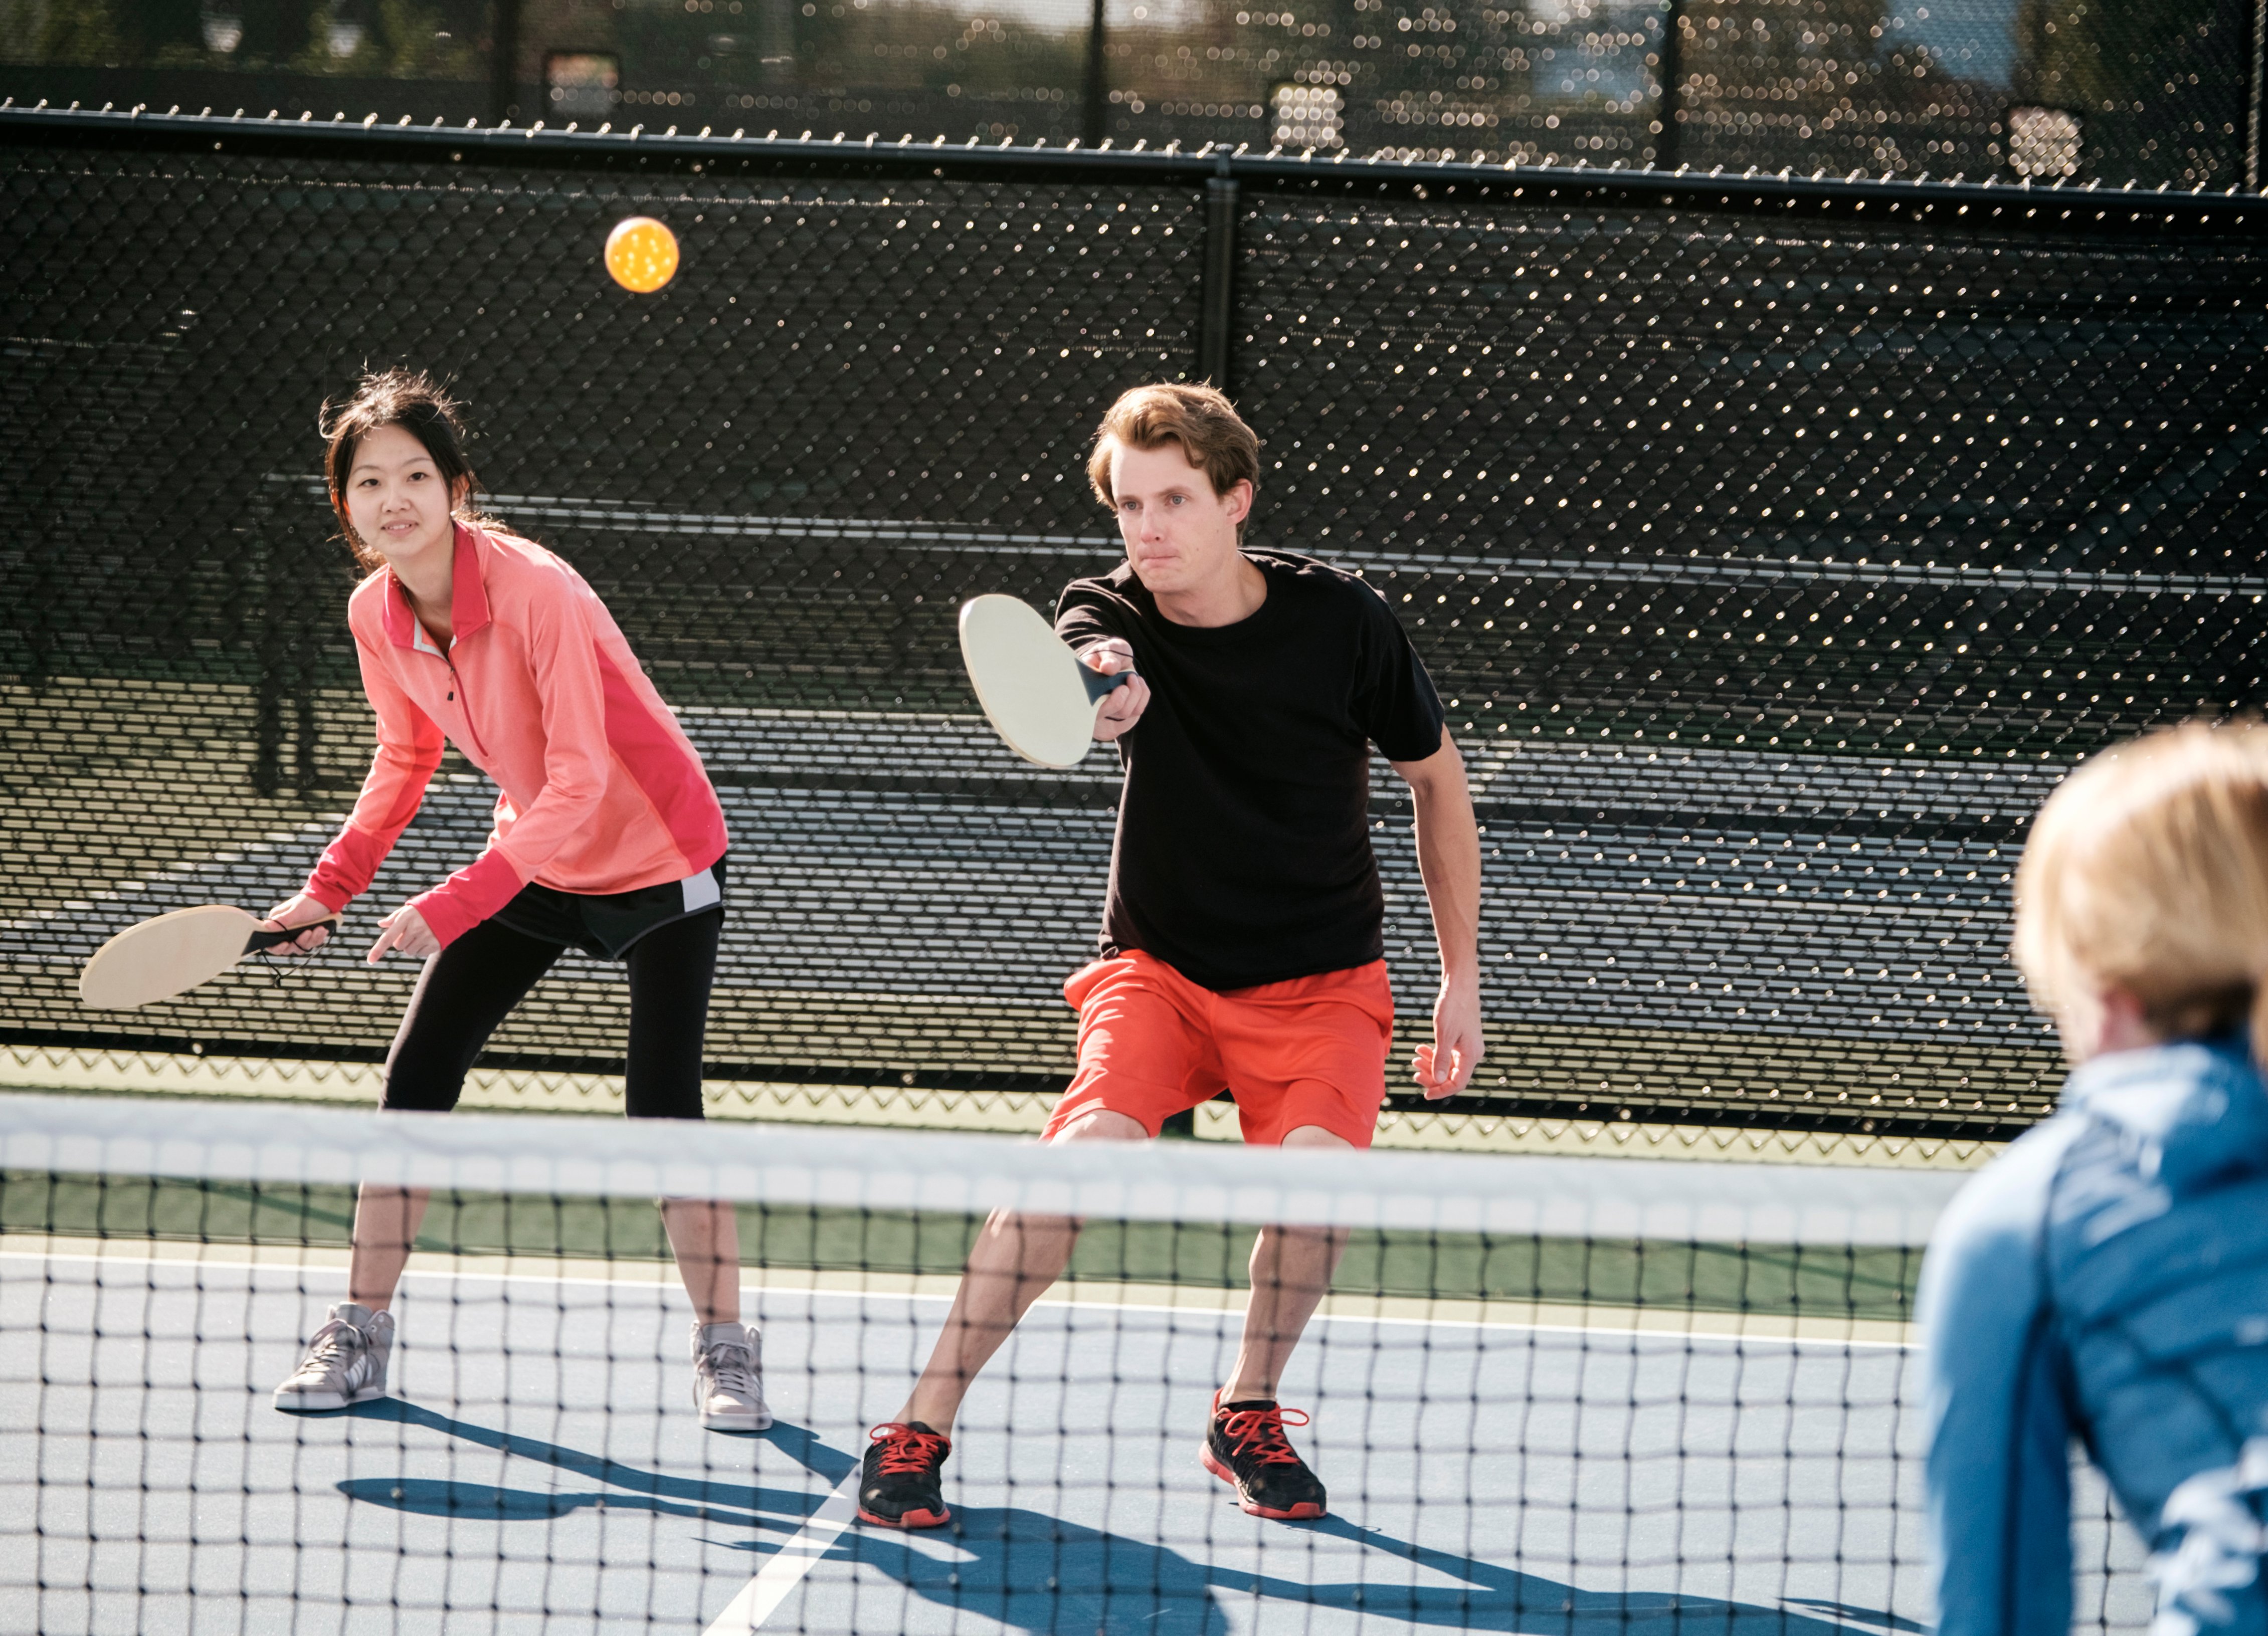 Couple playing pickleball outdoors on a court